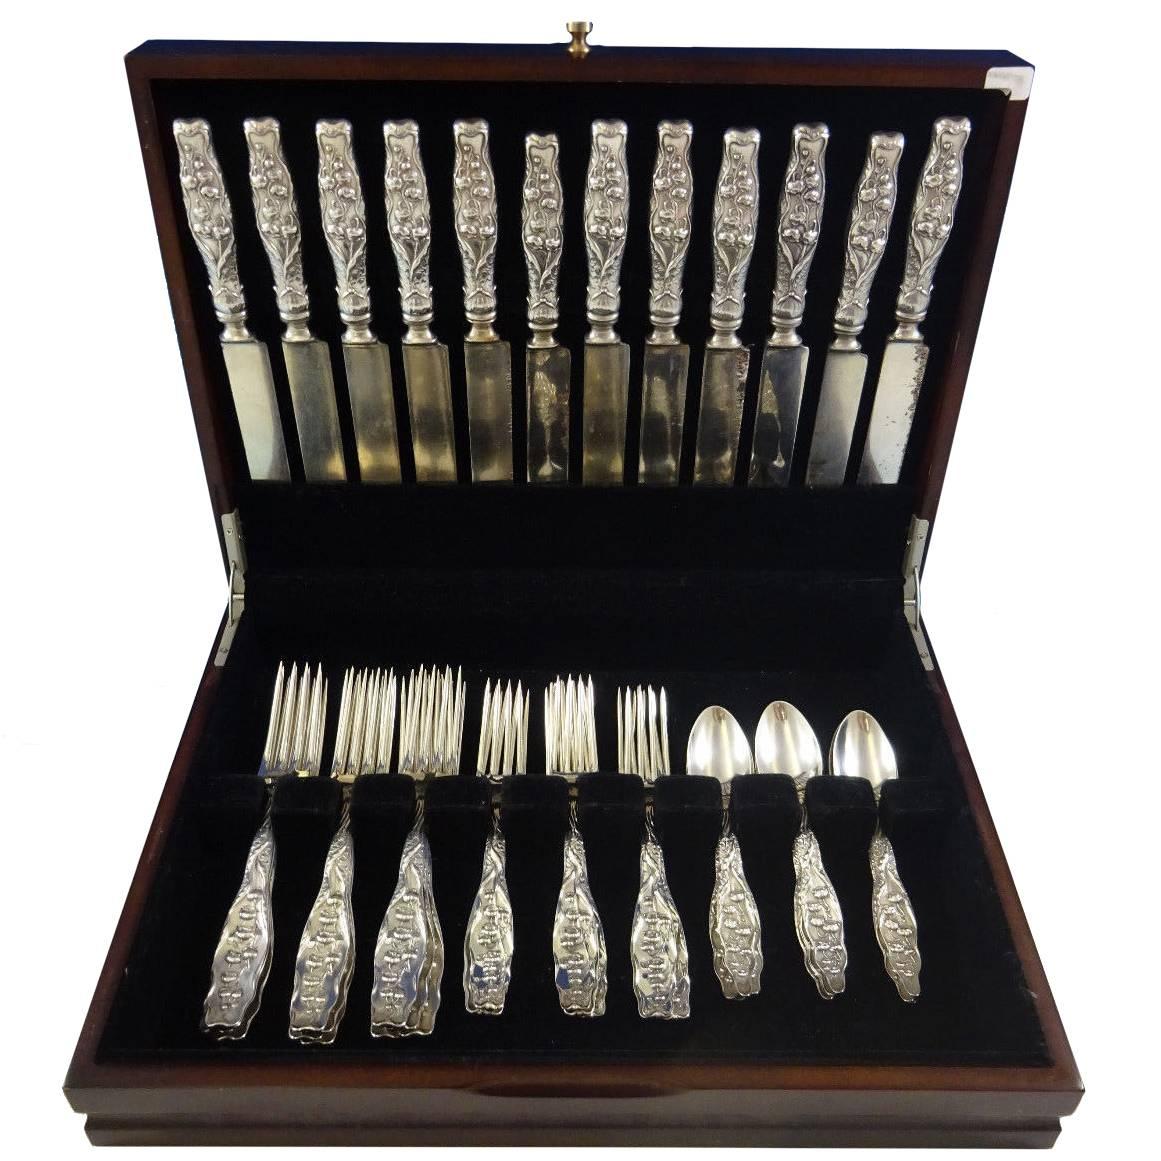 Lily of the Valley by Whiting Sterling Silver Flatware Service Set of 48 Pieces